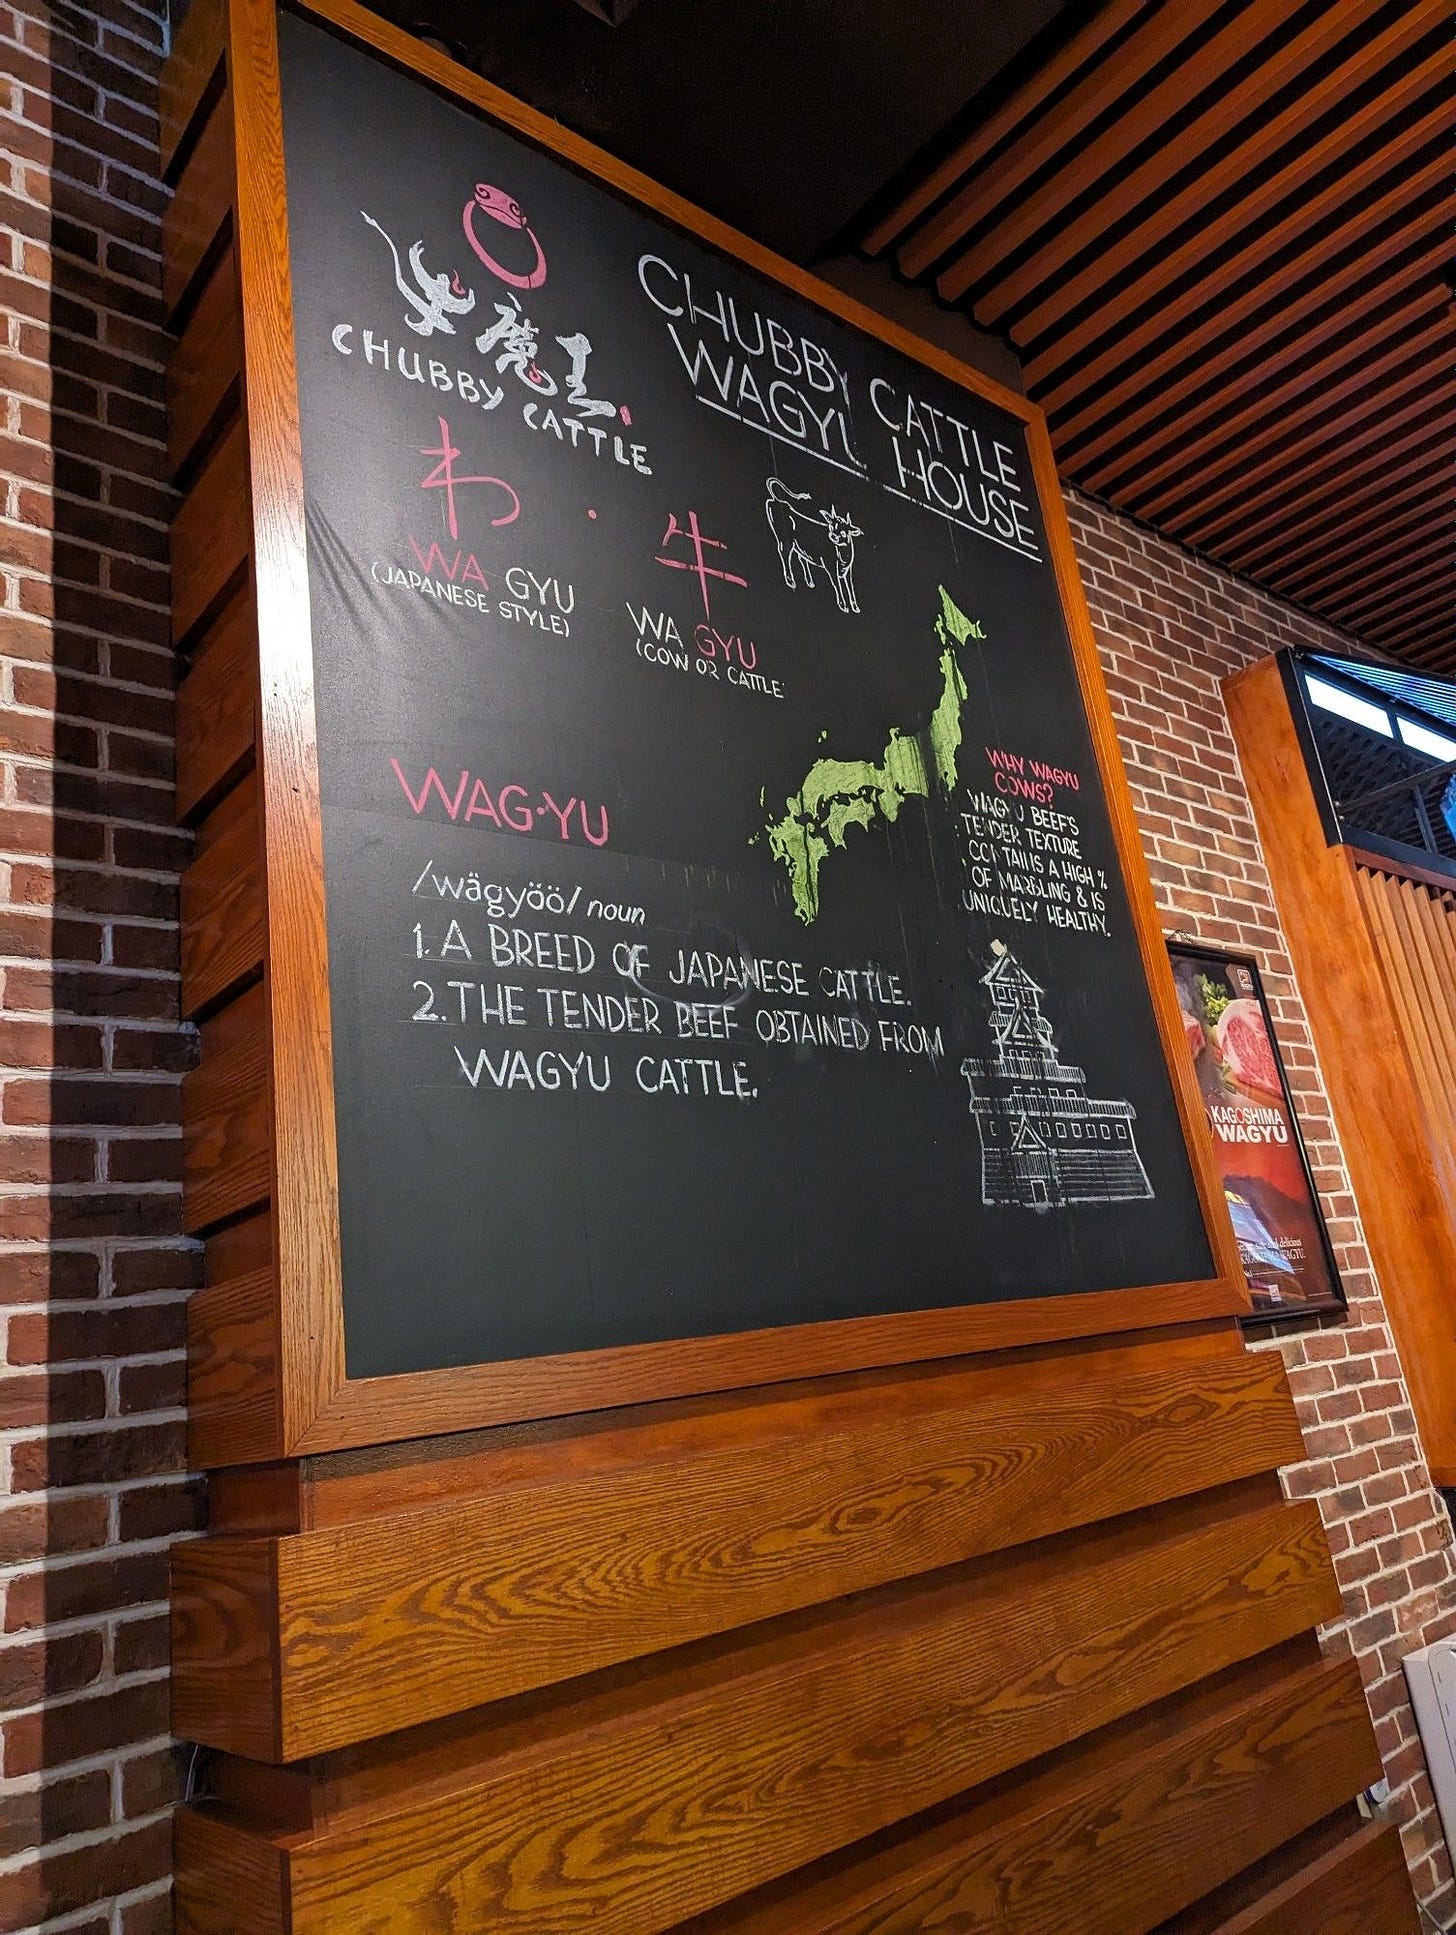 Chalkboard describing the Chubby Cattle and wagyu in general. There's a chair sketch of Japan, a cow, kanji, and the definition of wagyu.